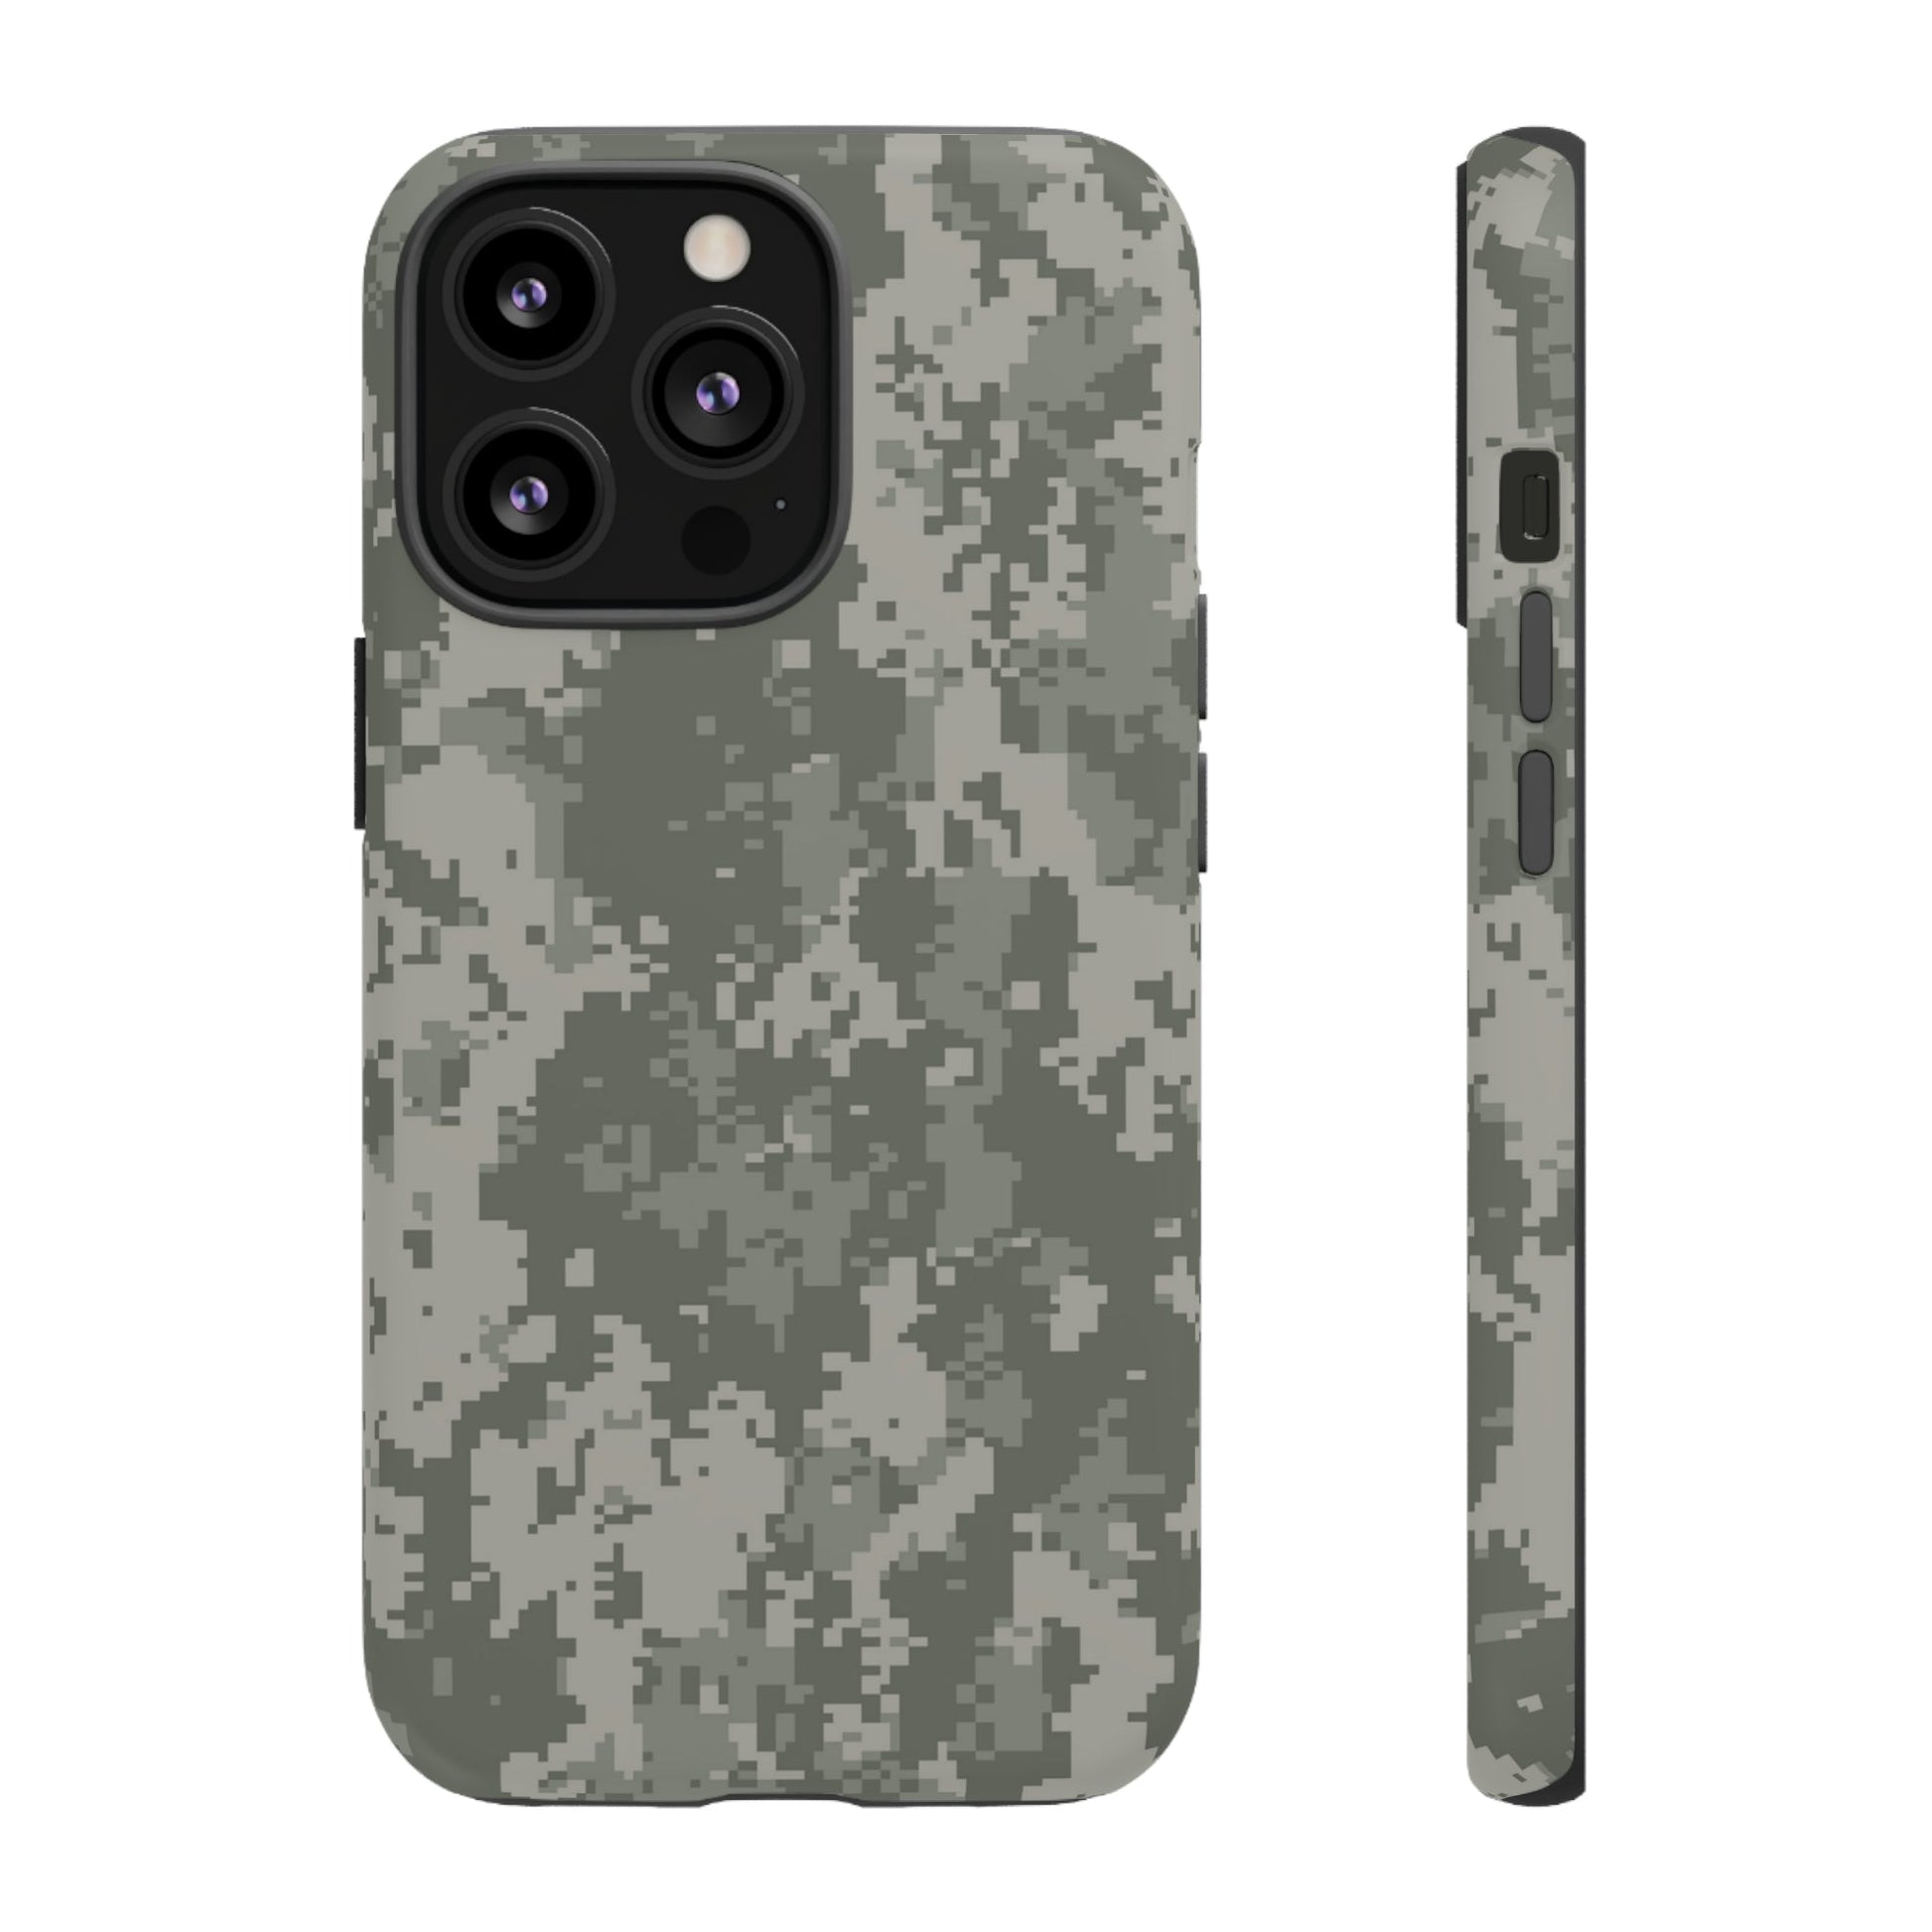 Phone Case - Military Style Tough Cases For IPhone, Samsung, Google